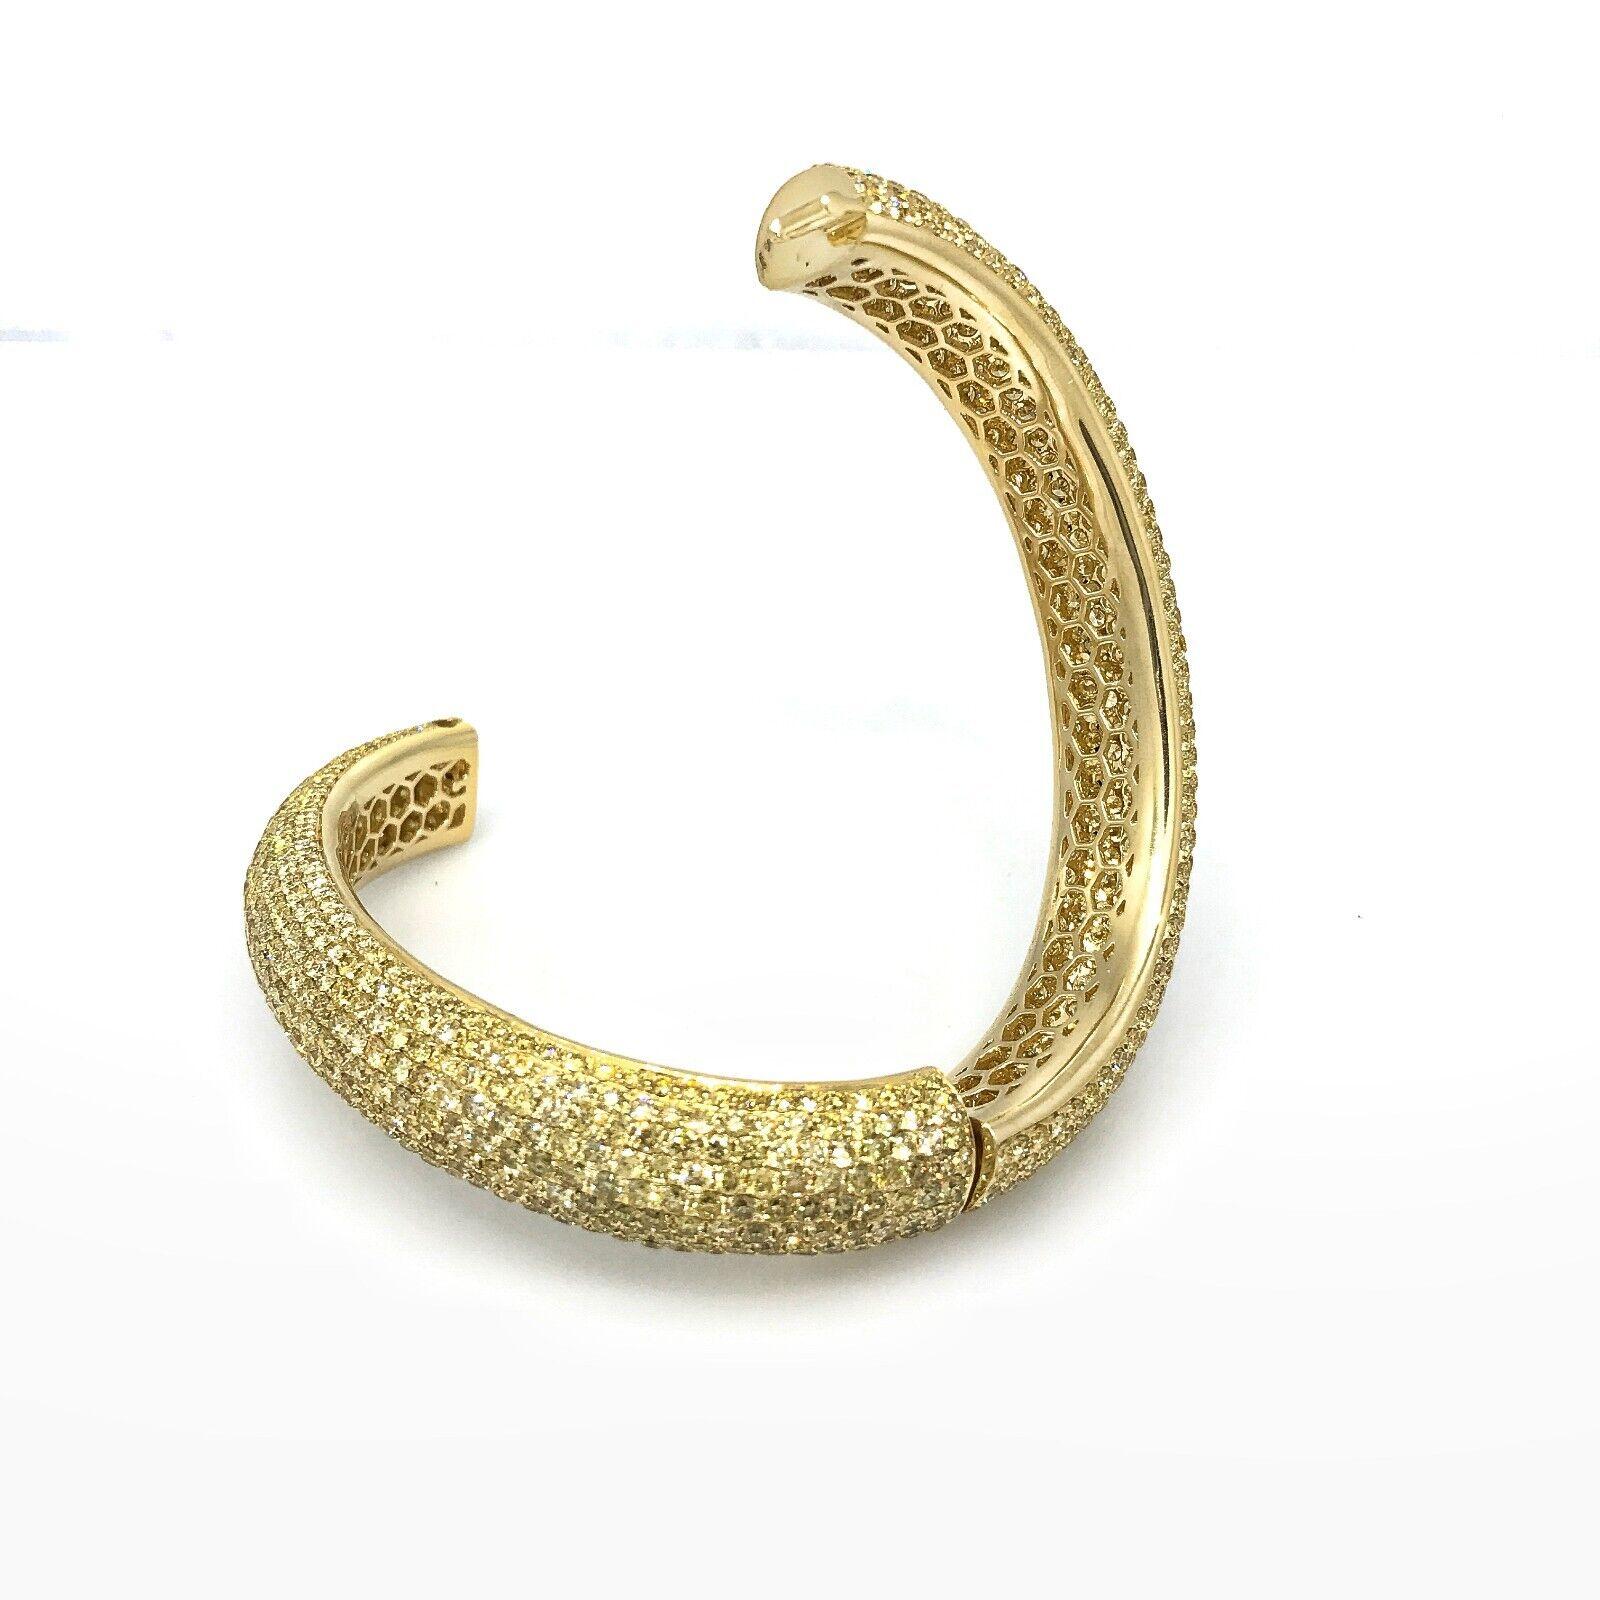 Natural Yellow Diamond Bangle Bracelet with 24.36 Carats in 18k Yellow Gold

Pave Diamond Bracelet features 24.36 carats of Natural Yellow Round Brilliant Diamonds set in 9 rows all the way around the bracelet set in 18k Yellow Gold. Bracelet is